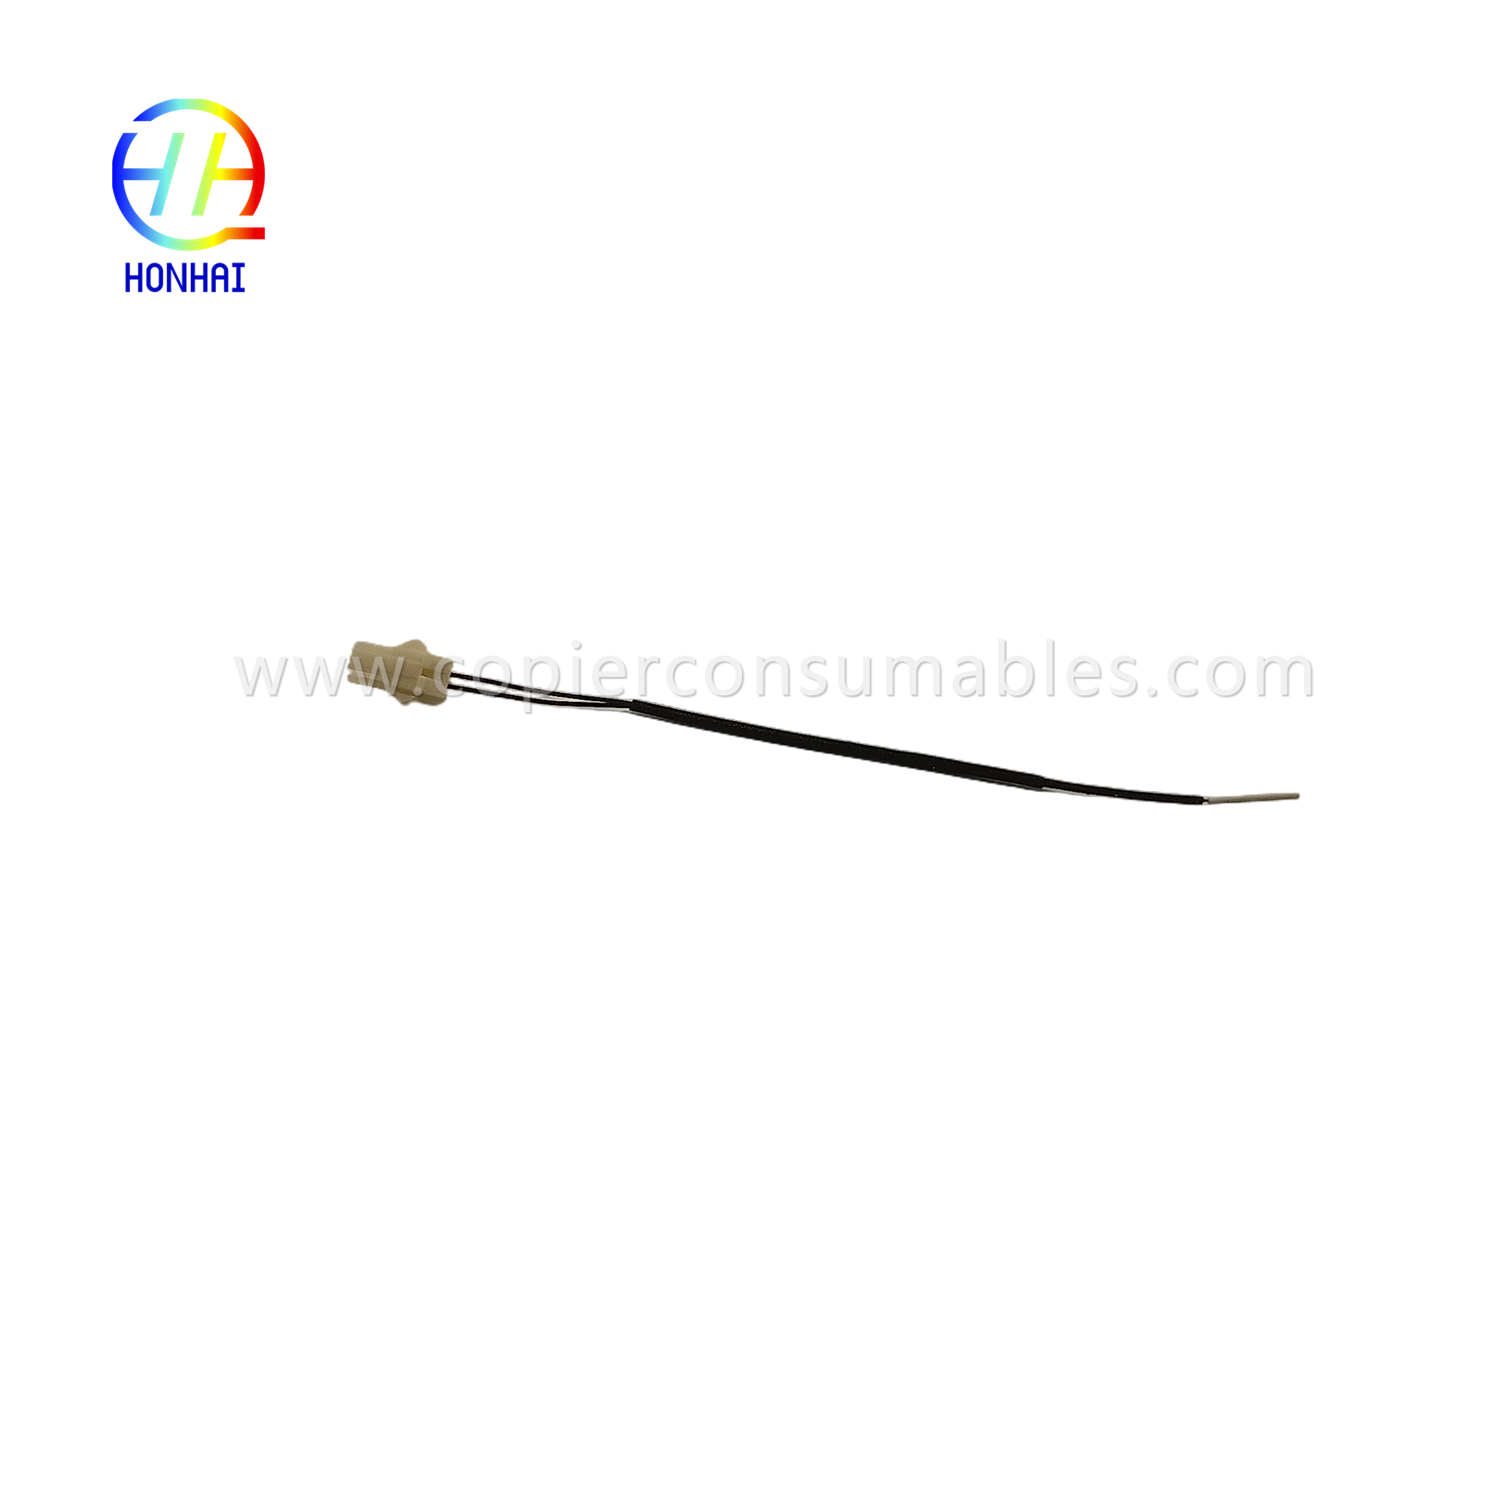 Fuser Thermistor for OCE 9400 TDS300 TDS750 PW300 350